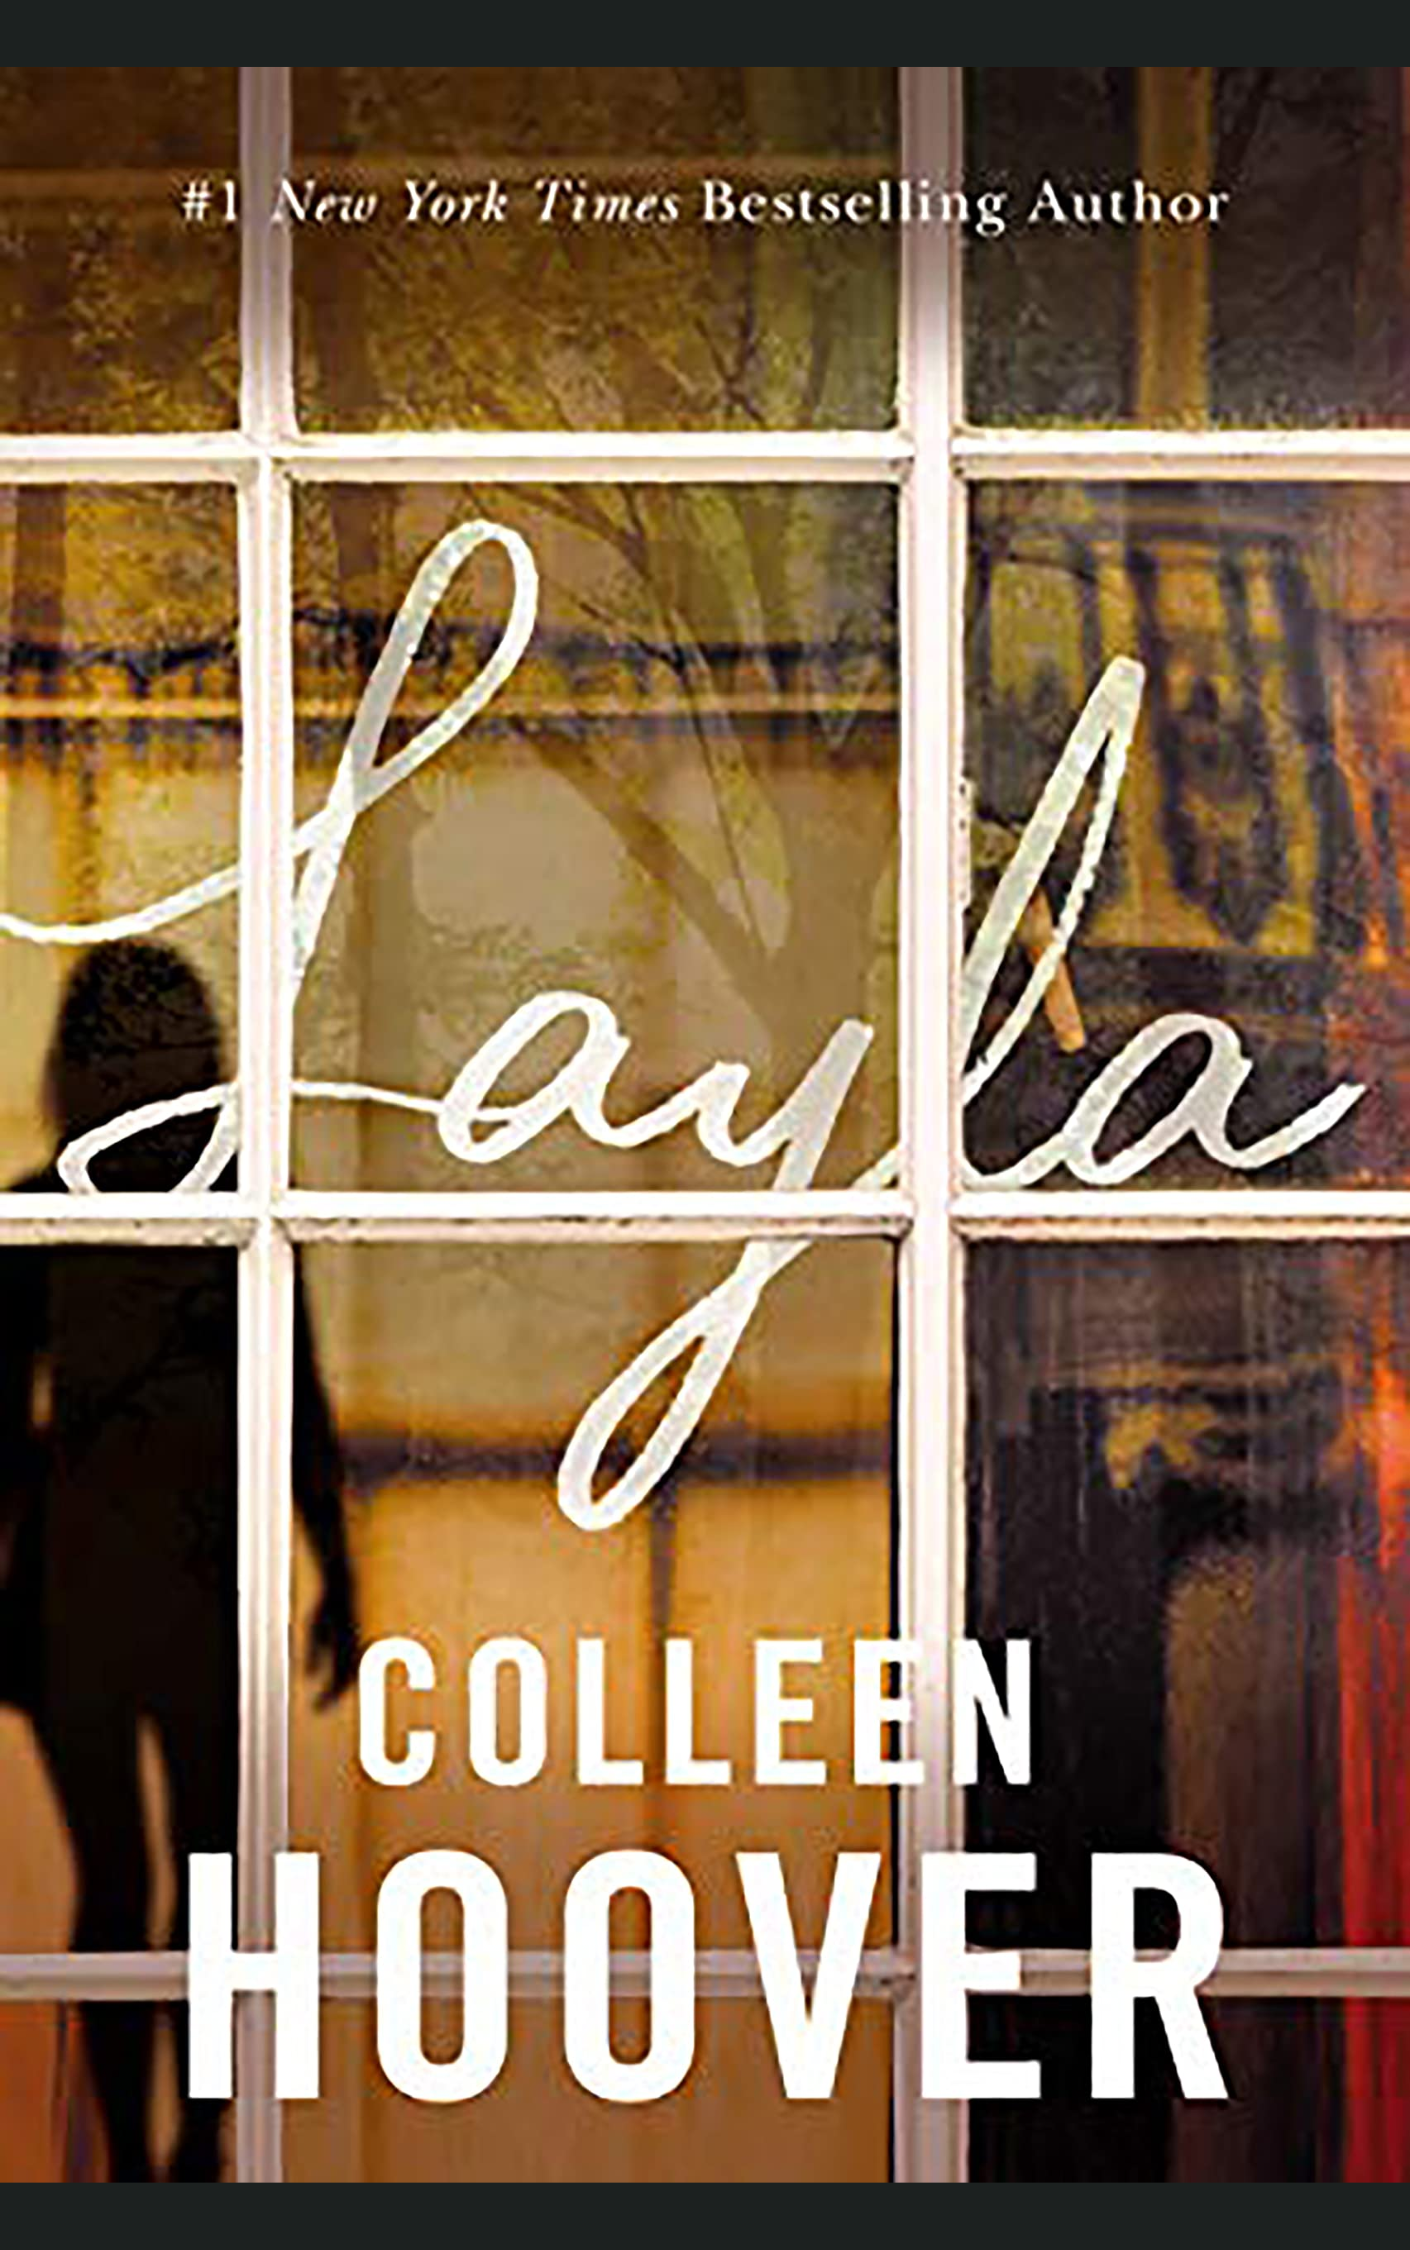 LAYLA by COLLEEN HOOVER